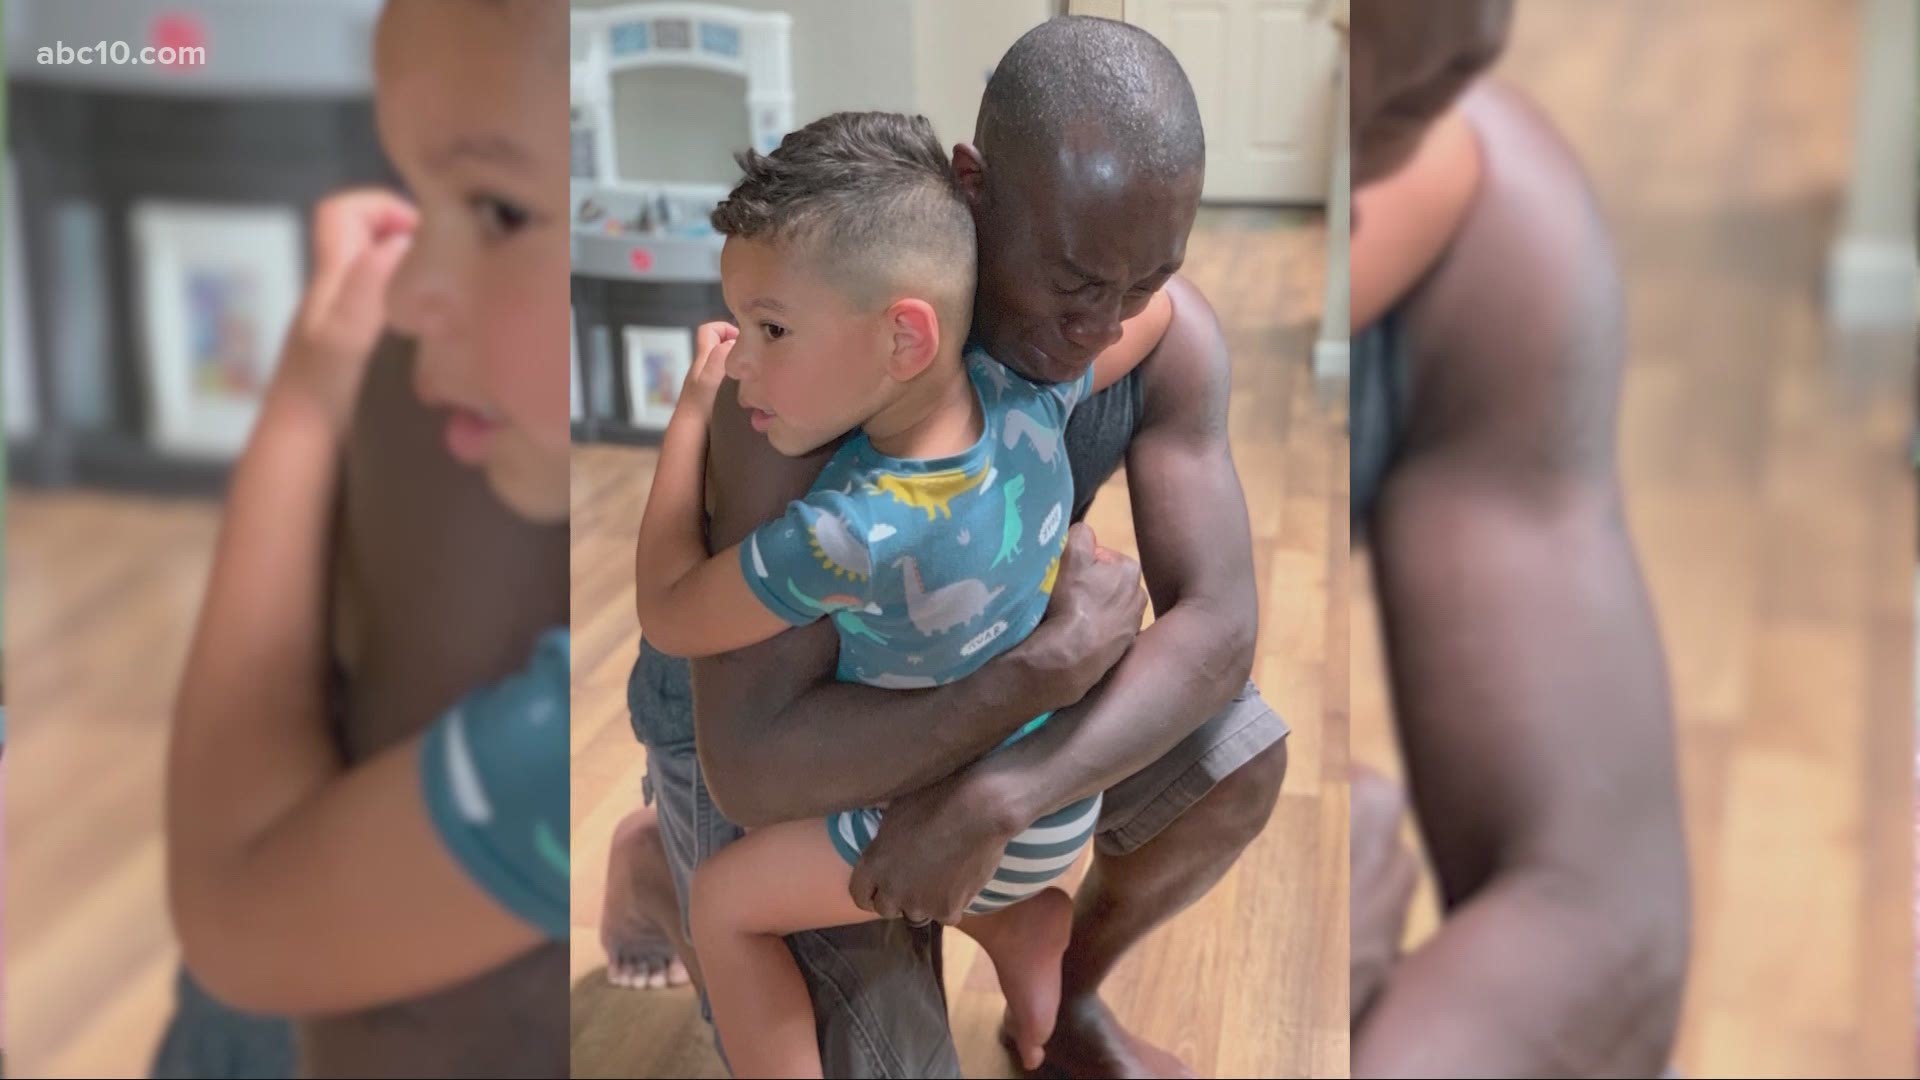 Jennifer Ingraham-Gonsalves photographed a moving moment as her husband Robert, a black man, embraced their son in response to recent protests.